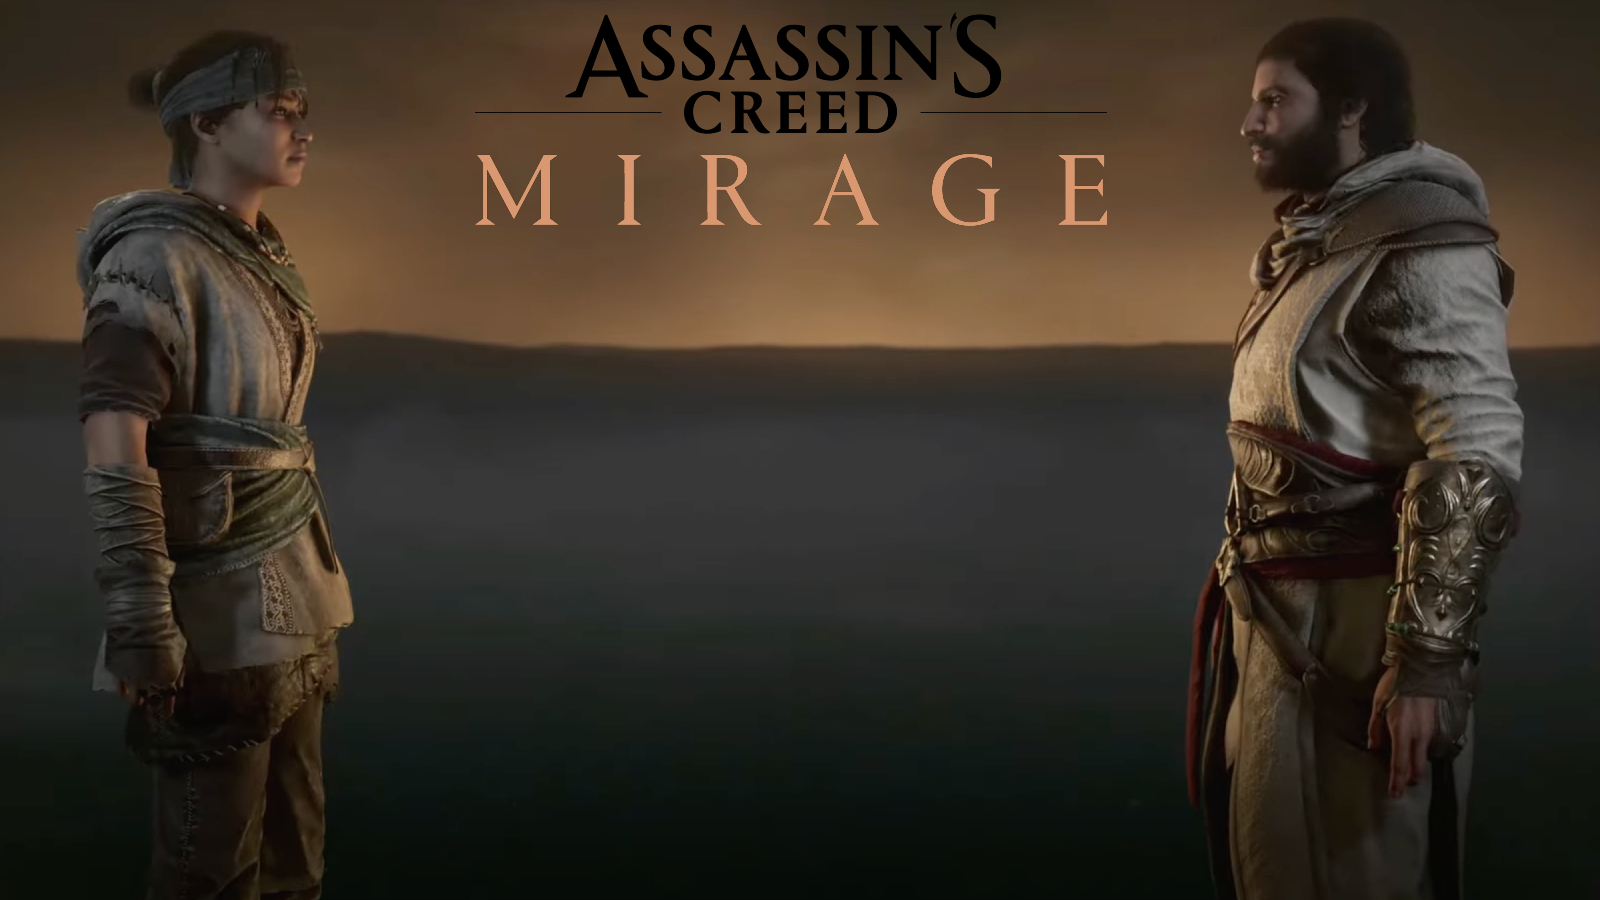 The new Assassin's Creed Mirage logo is hiding an awesome secret message